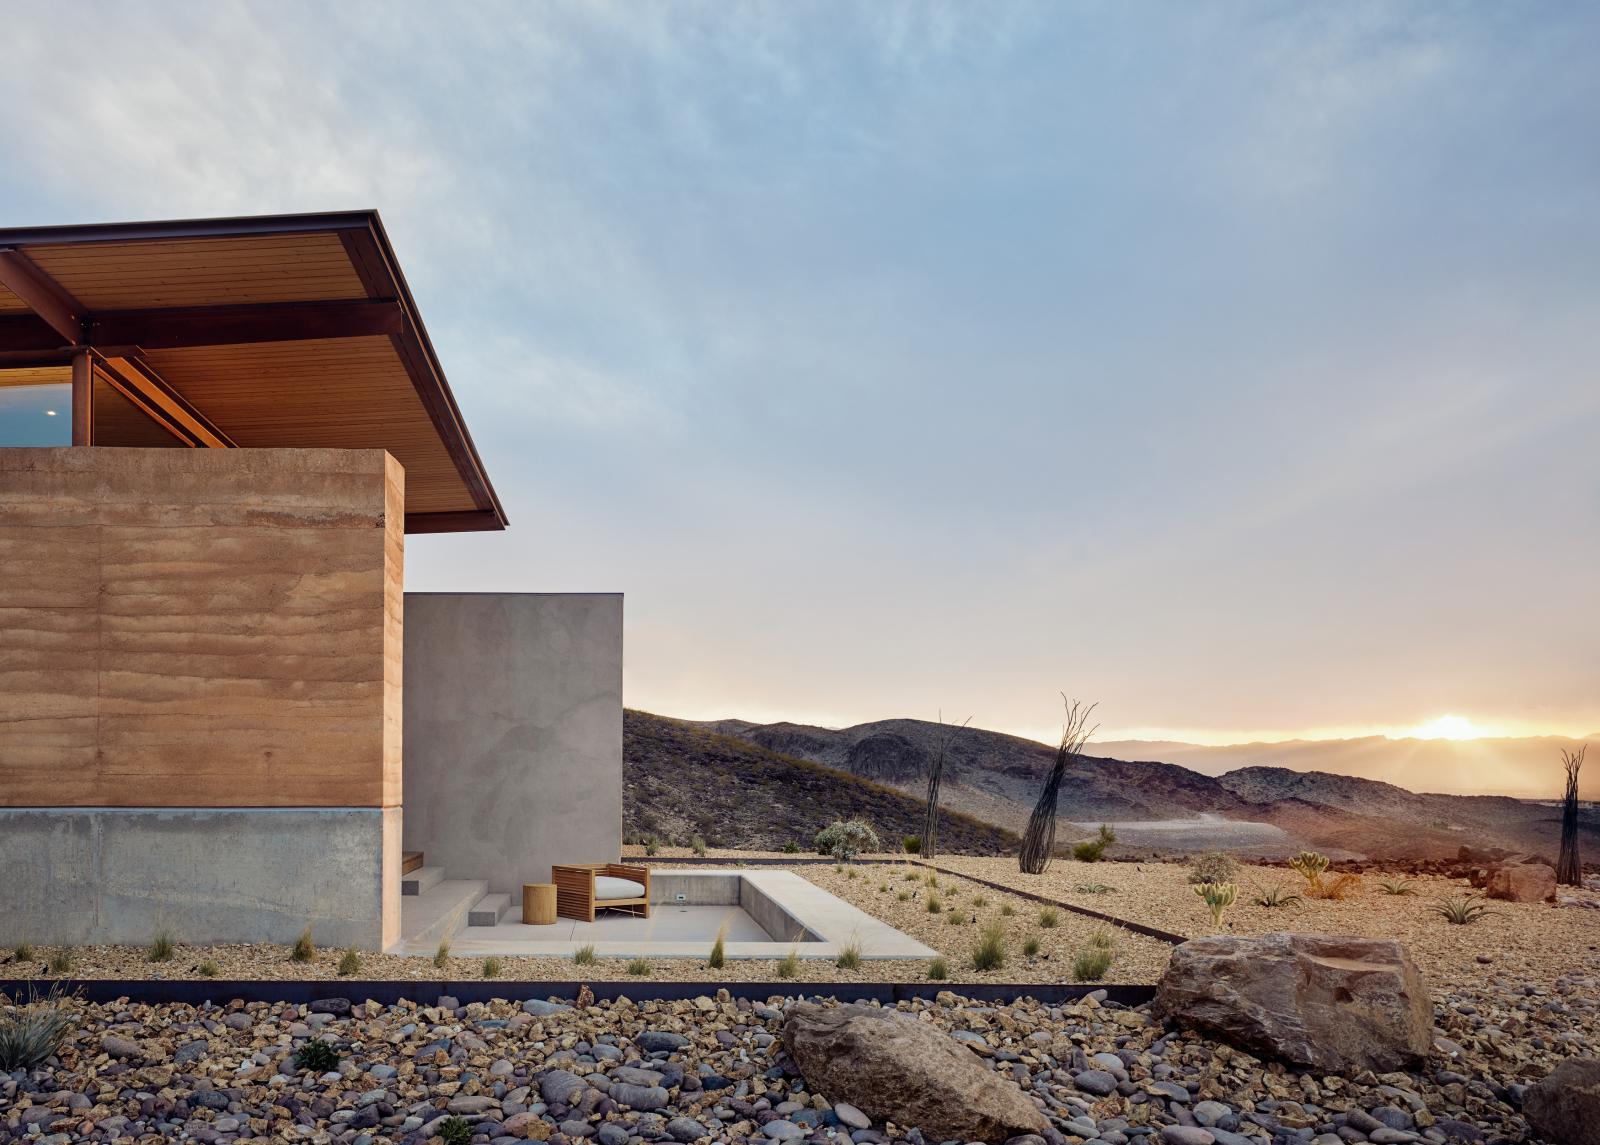 The rammed earth textures, colors and materials blend seamlessly with the surrounding desert.